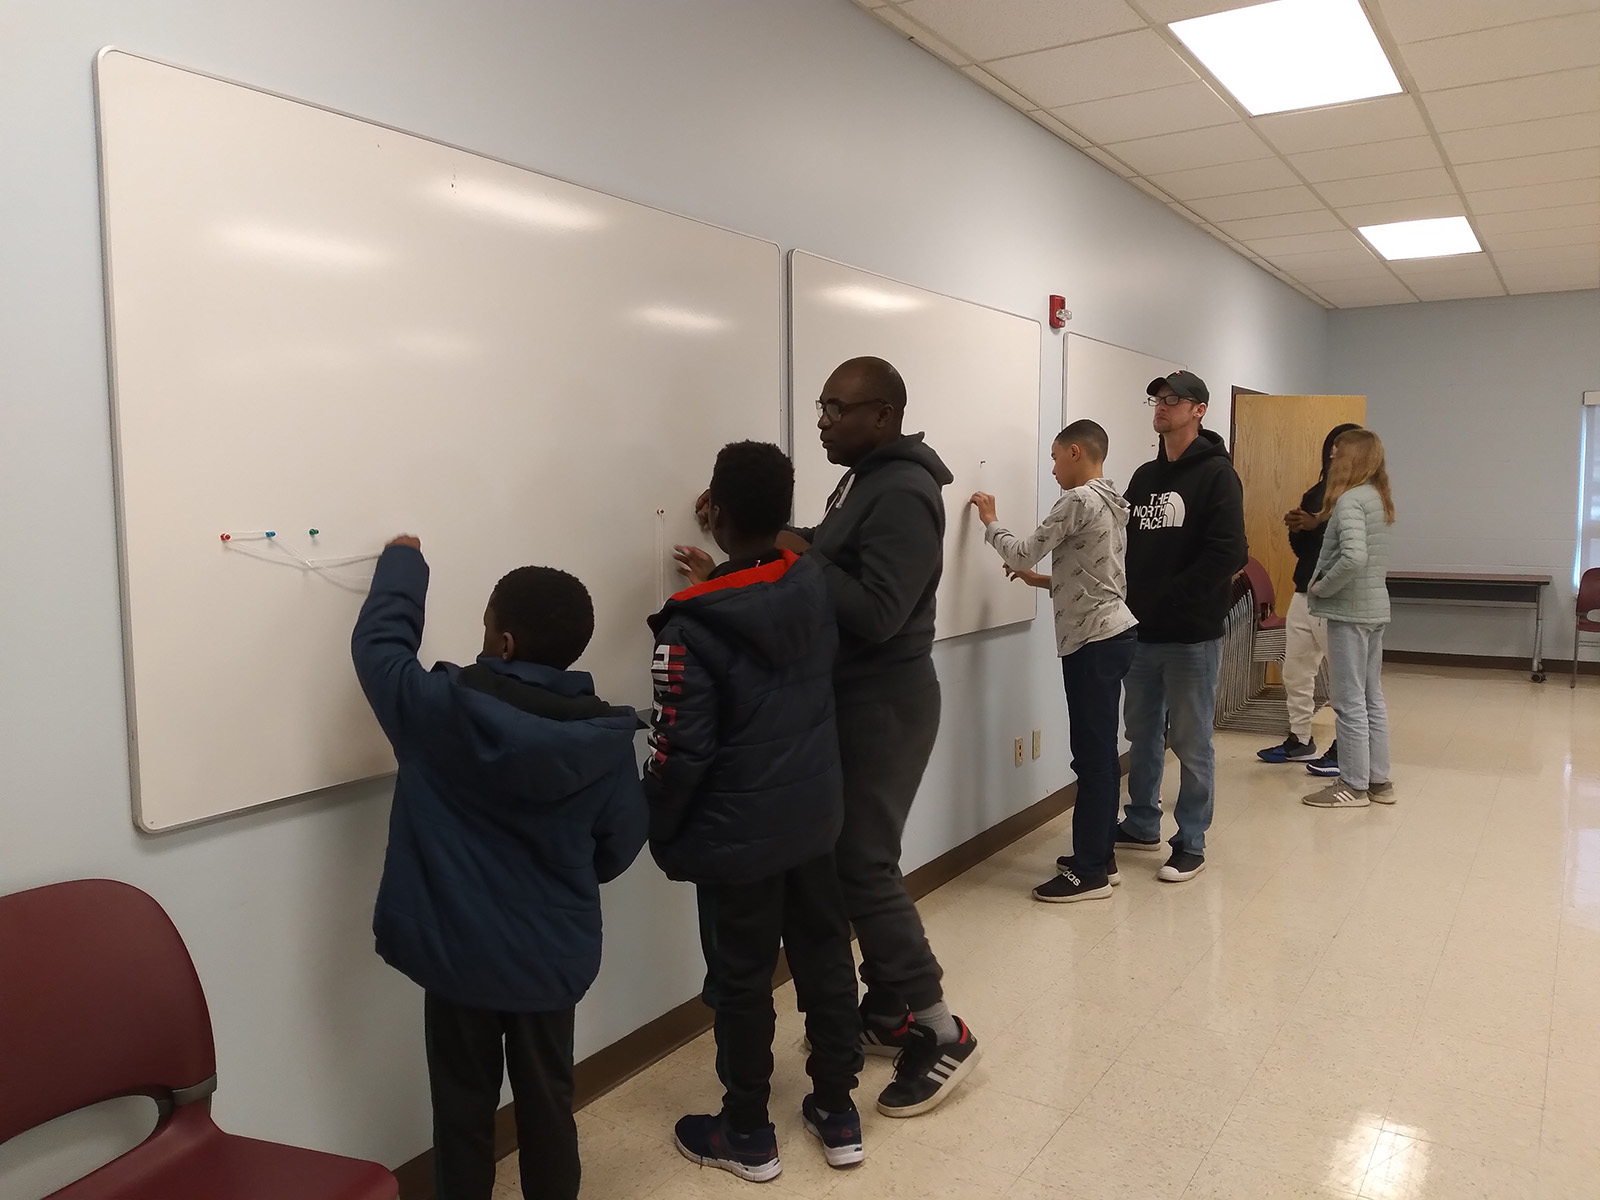 Kids and adults engaged in solving the picture hanging puzzle.